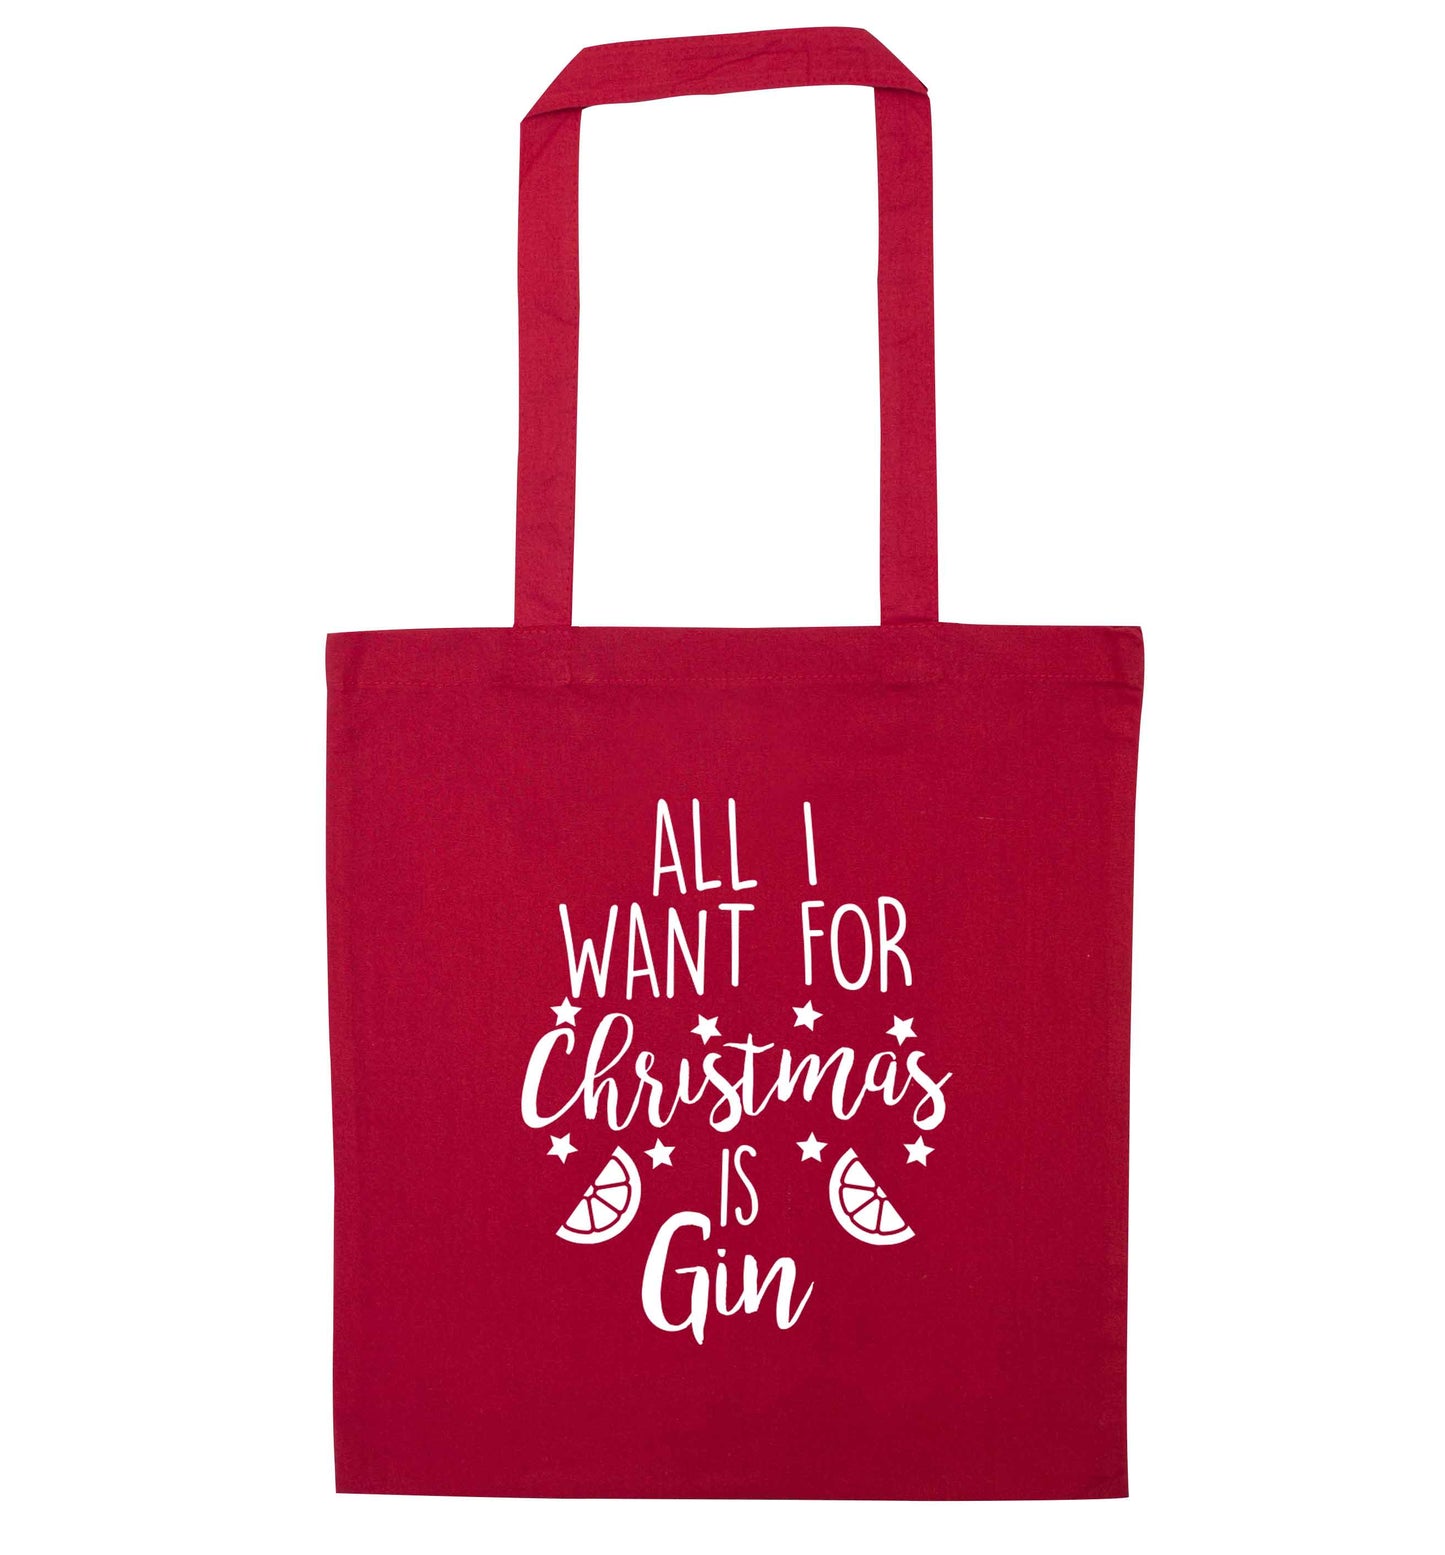 All I want for Christmas is gin red tote bag